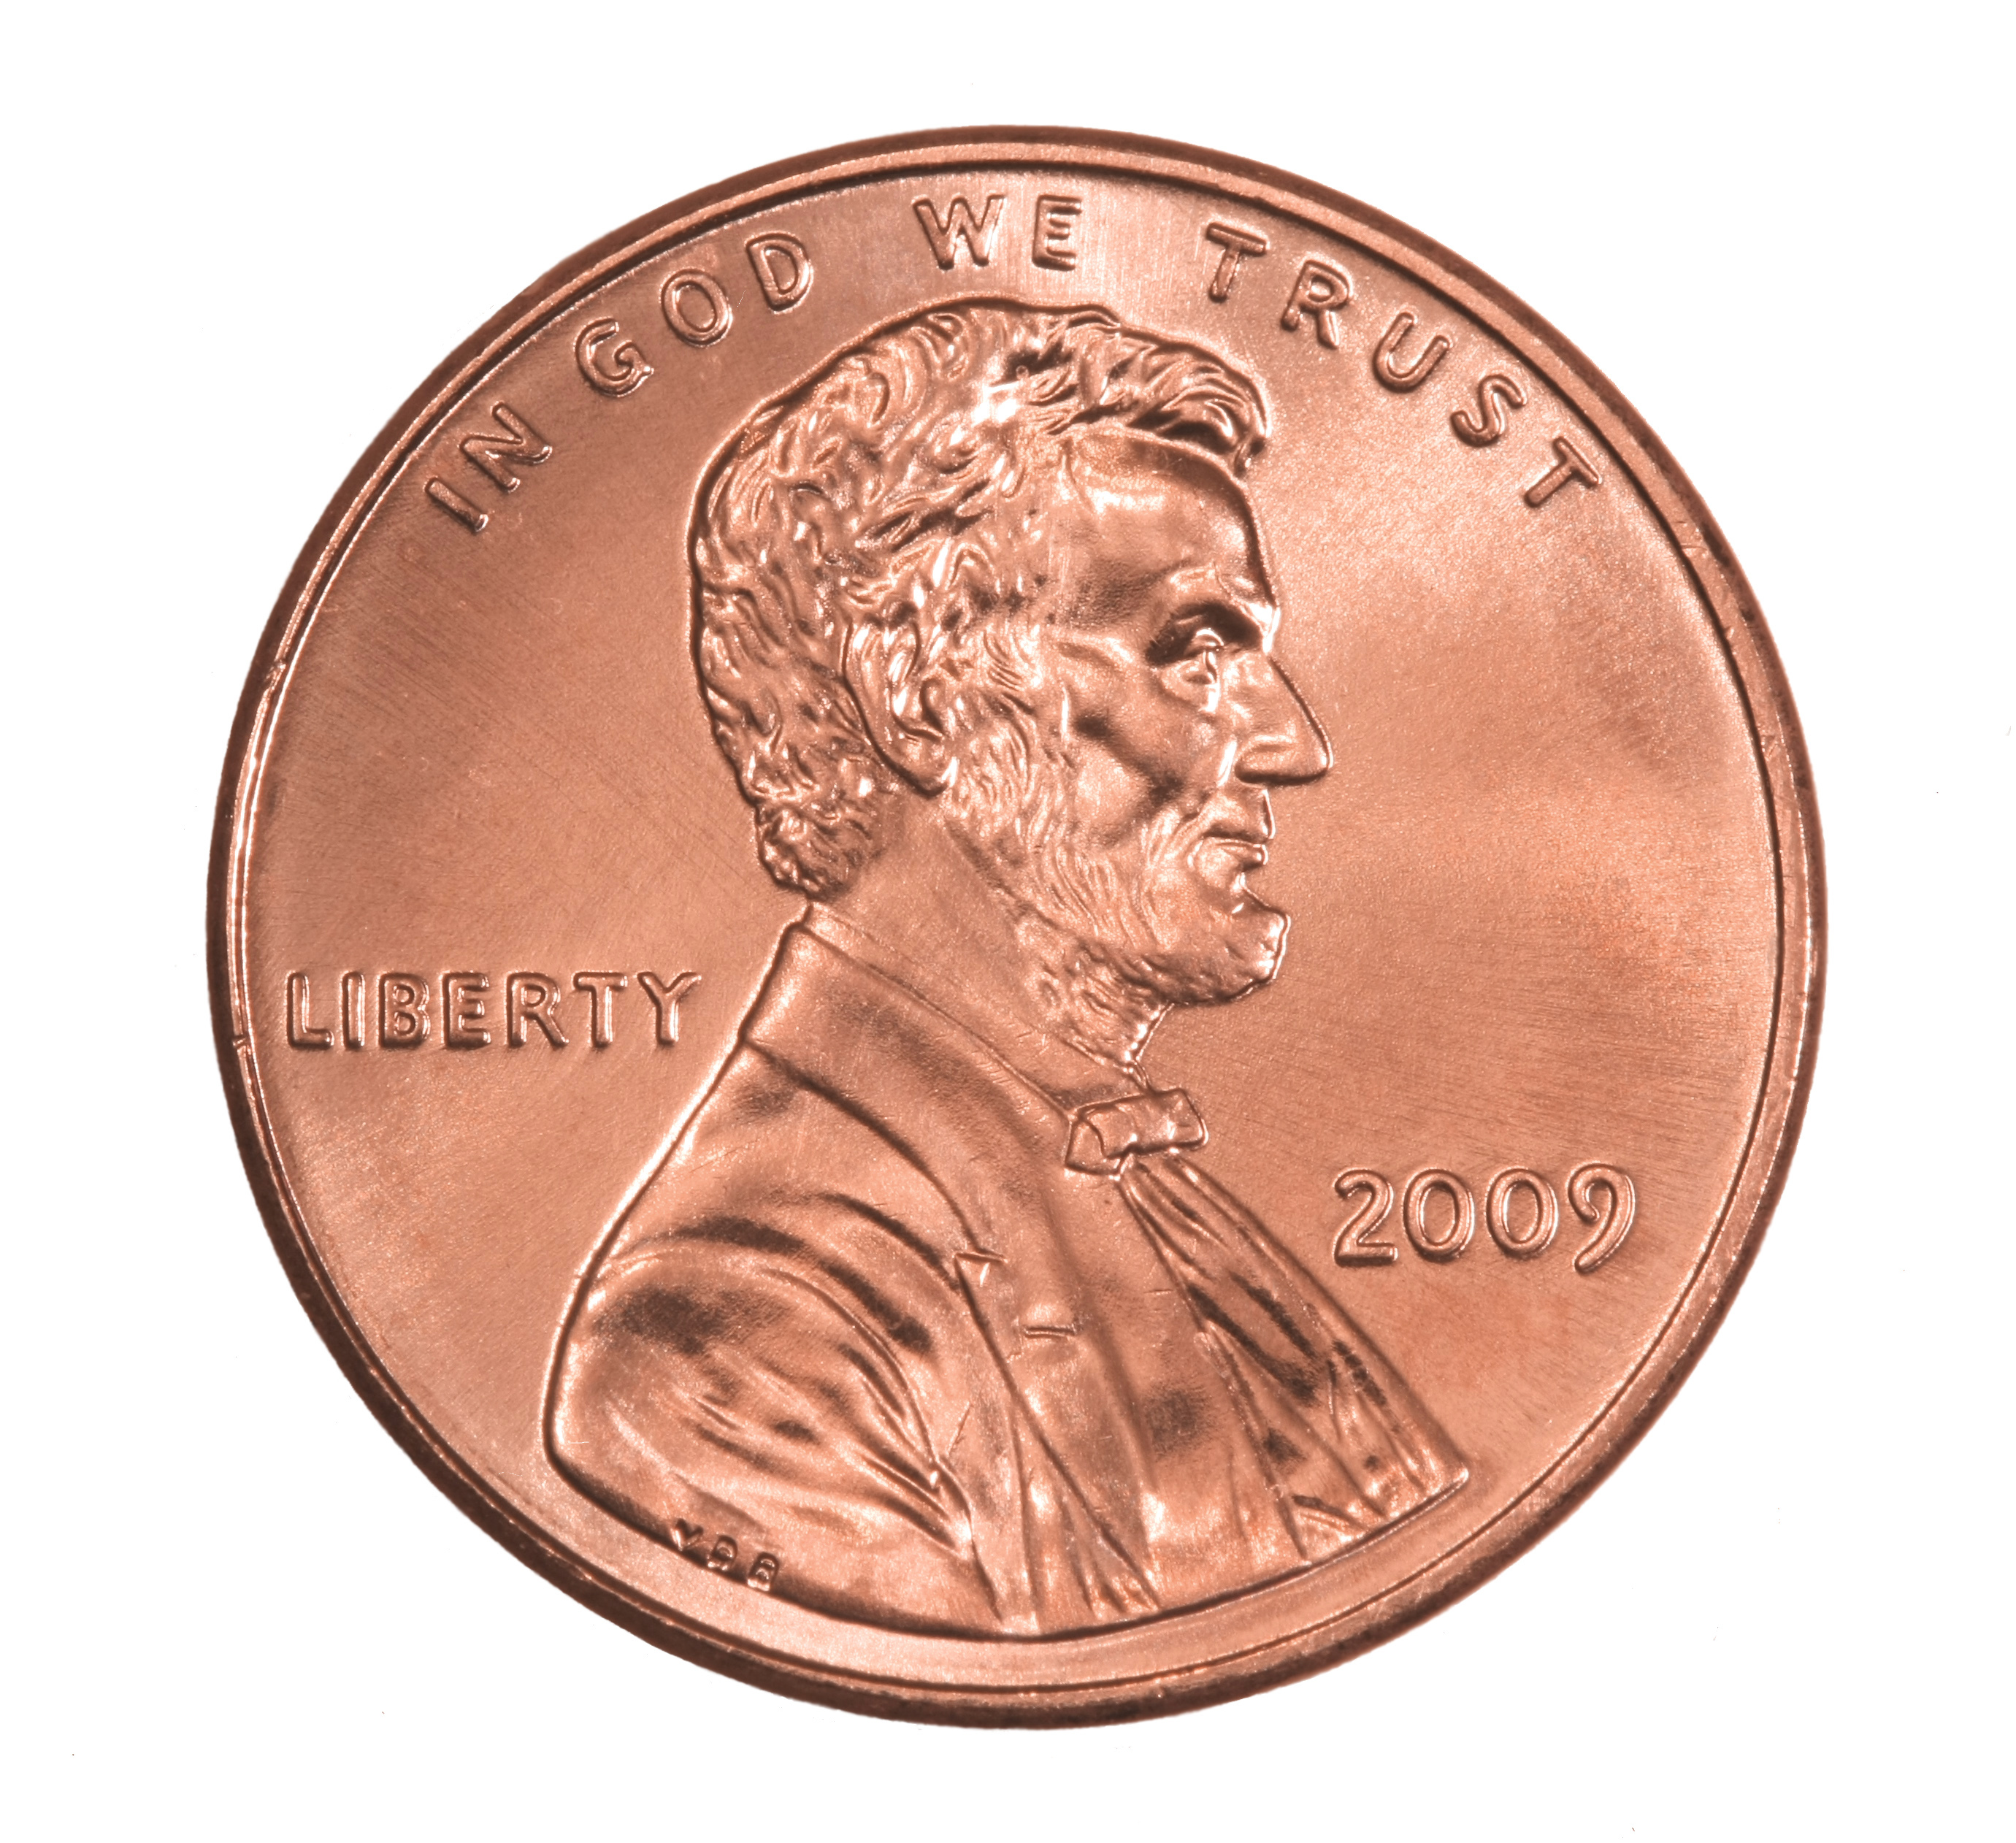 A United States Lincoln penny | Source: Shutterstock